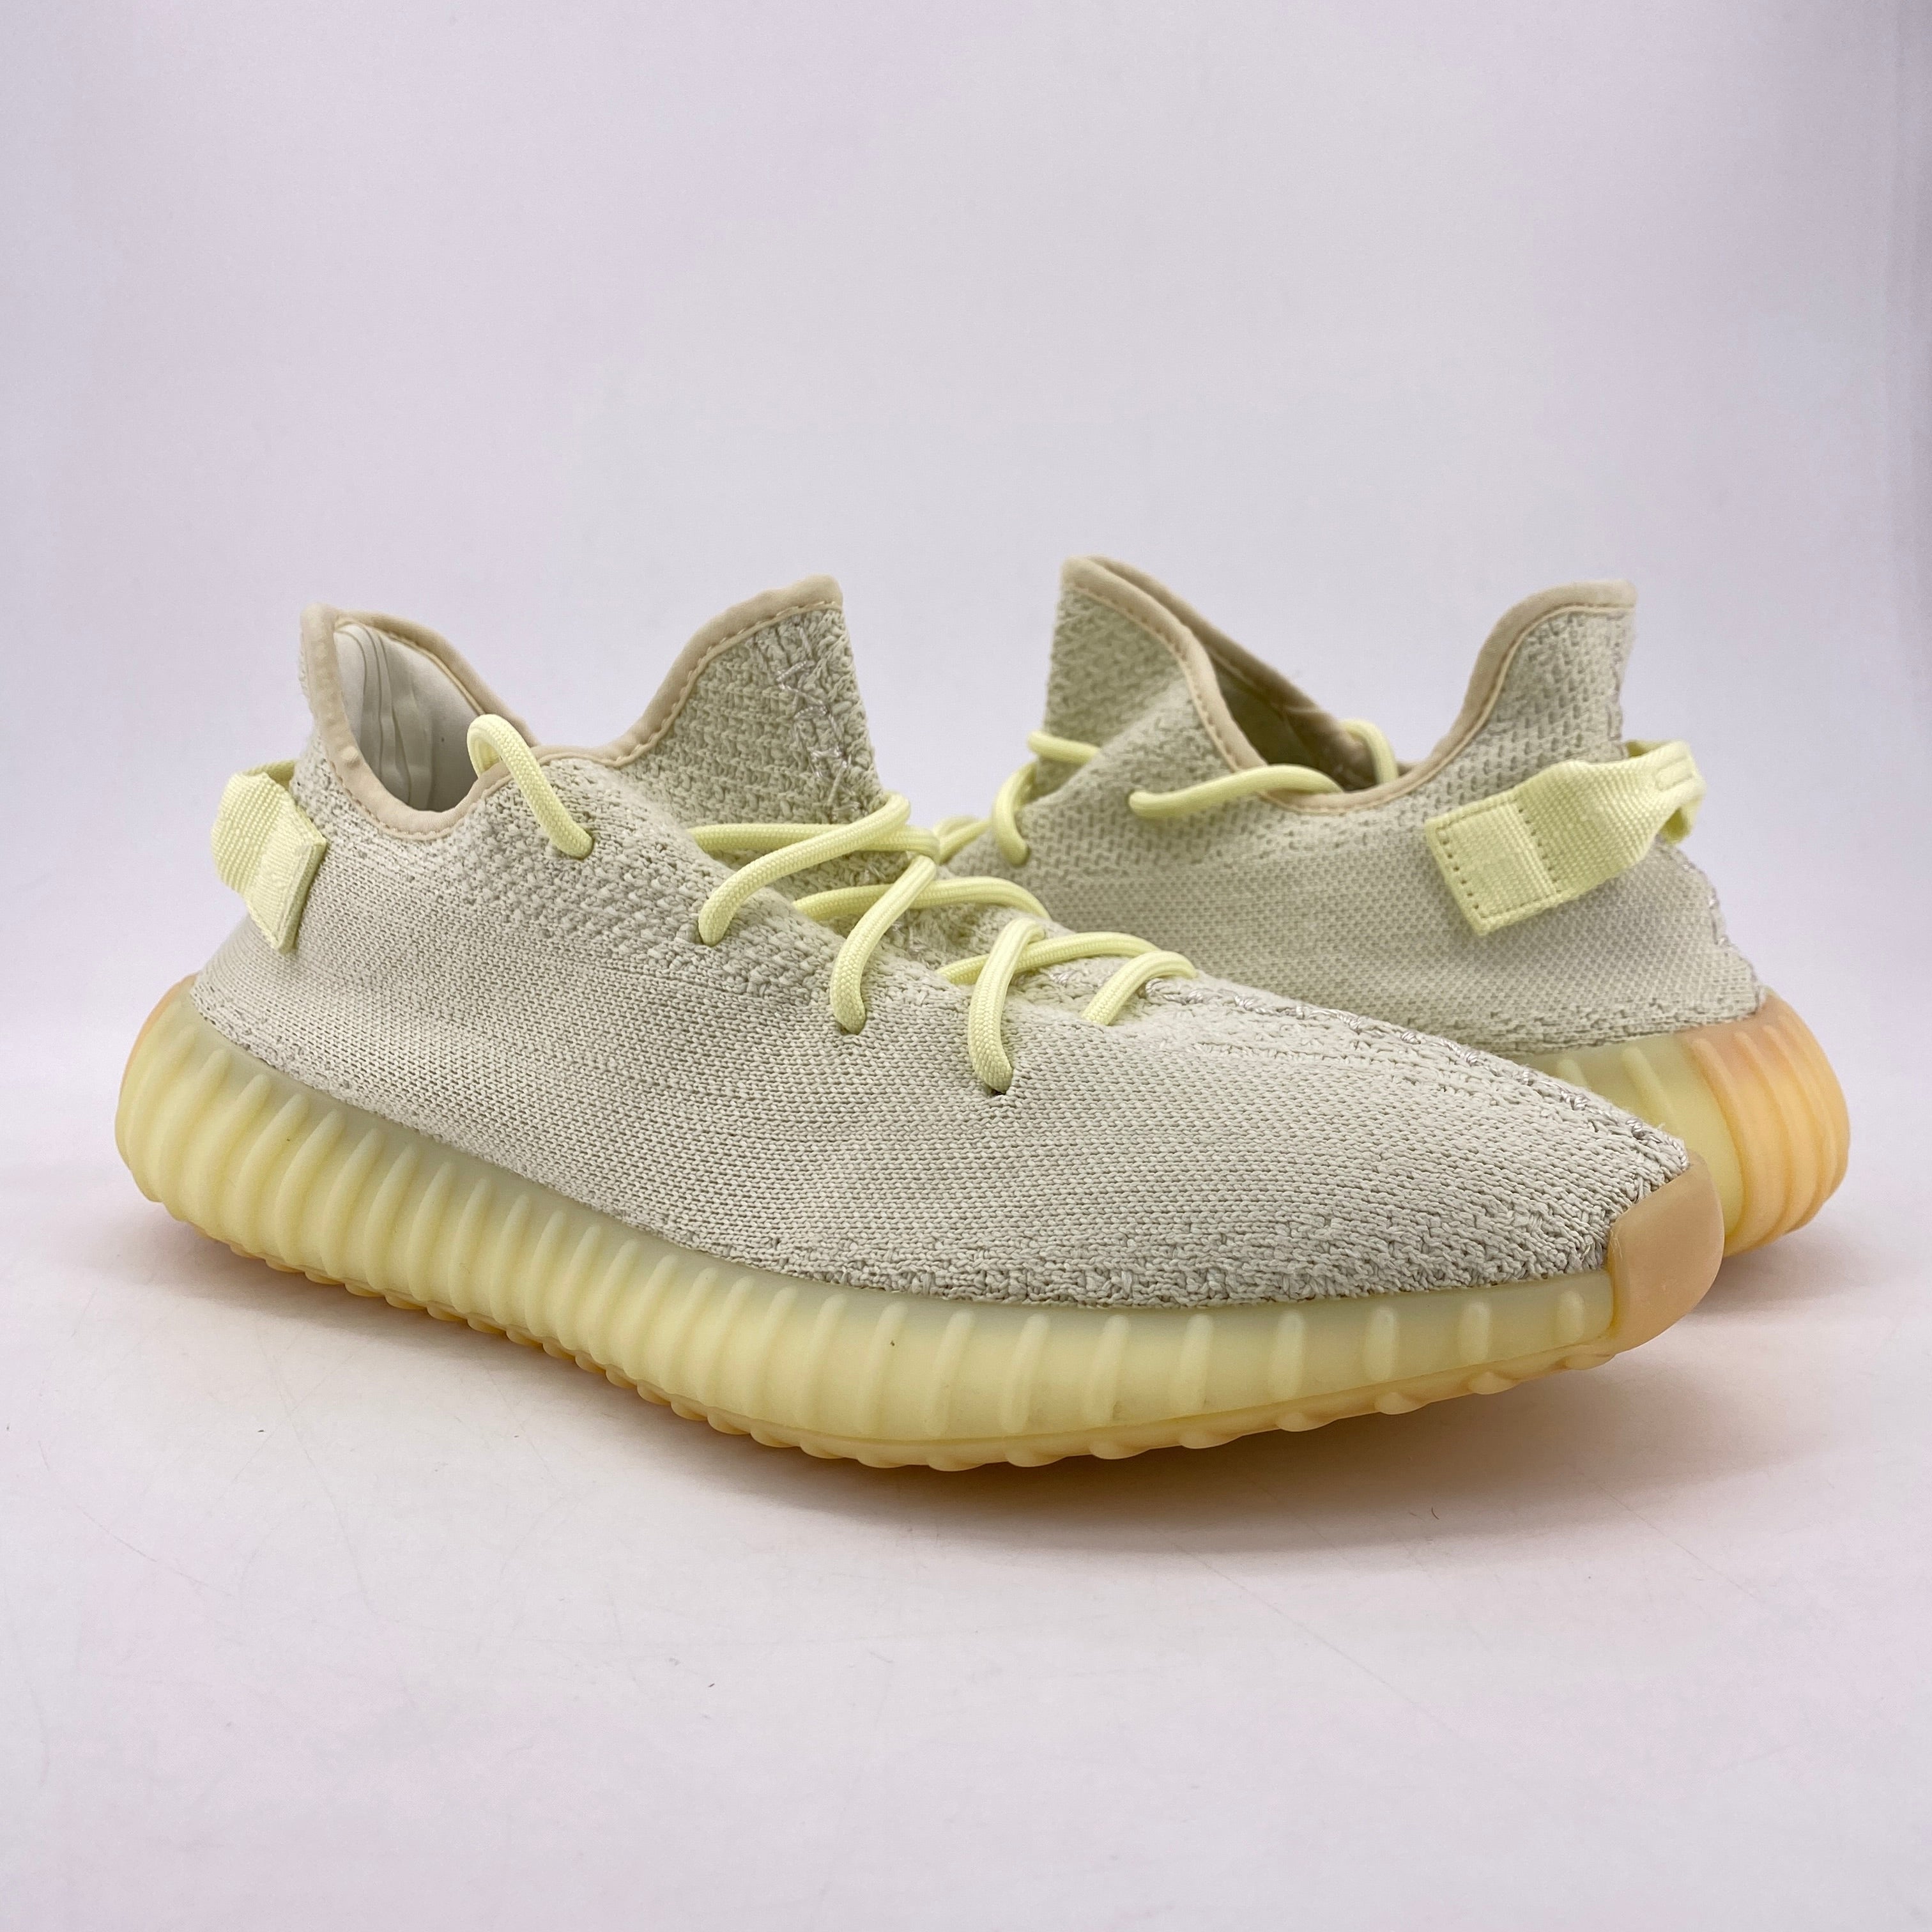 Yeezy 350 v2 Butter 2018 Size 10 – SOLED OUT JC